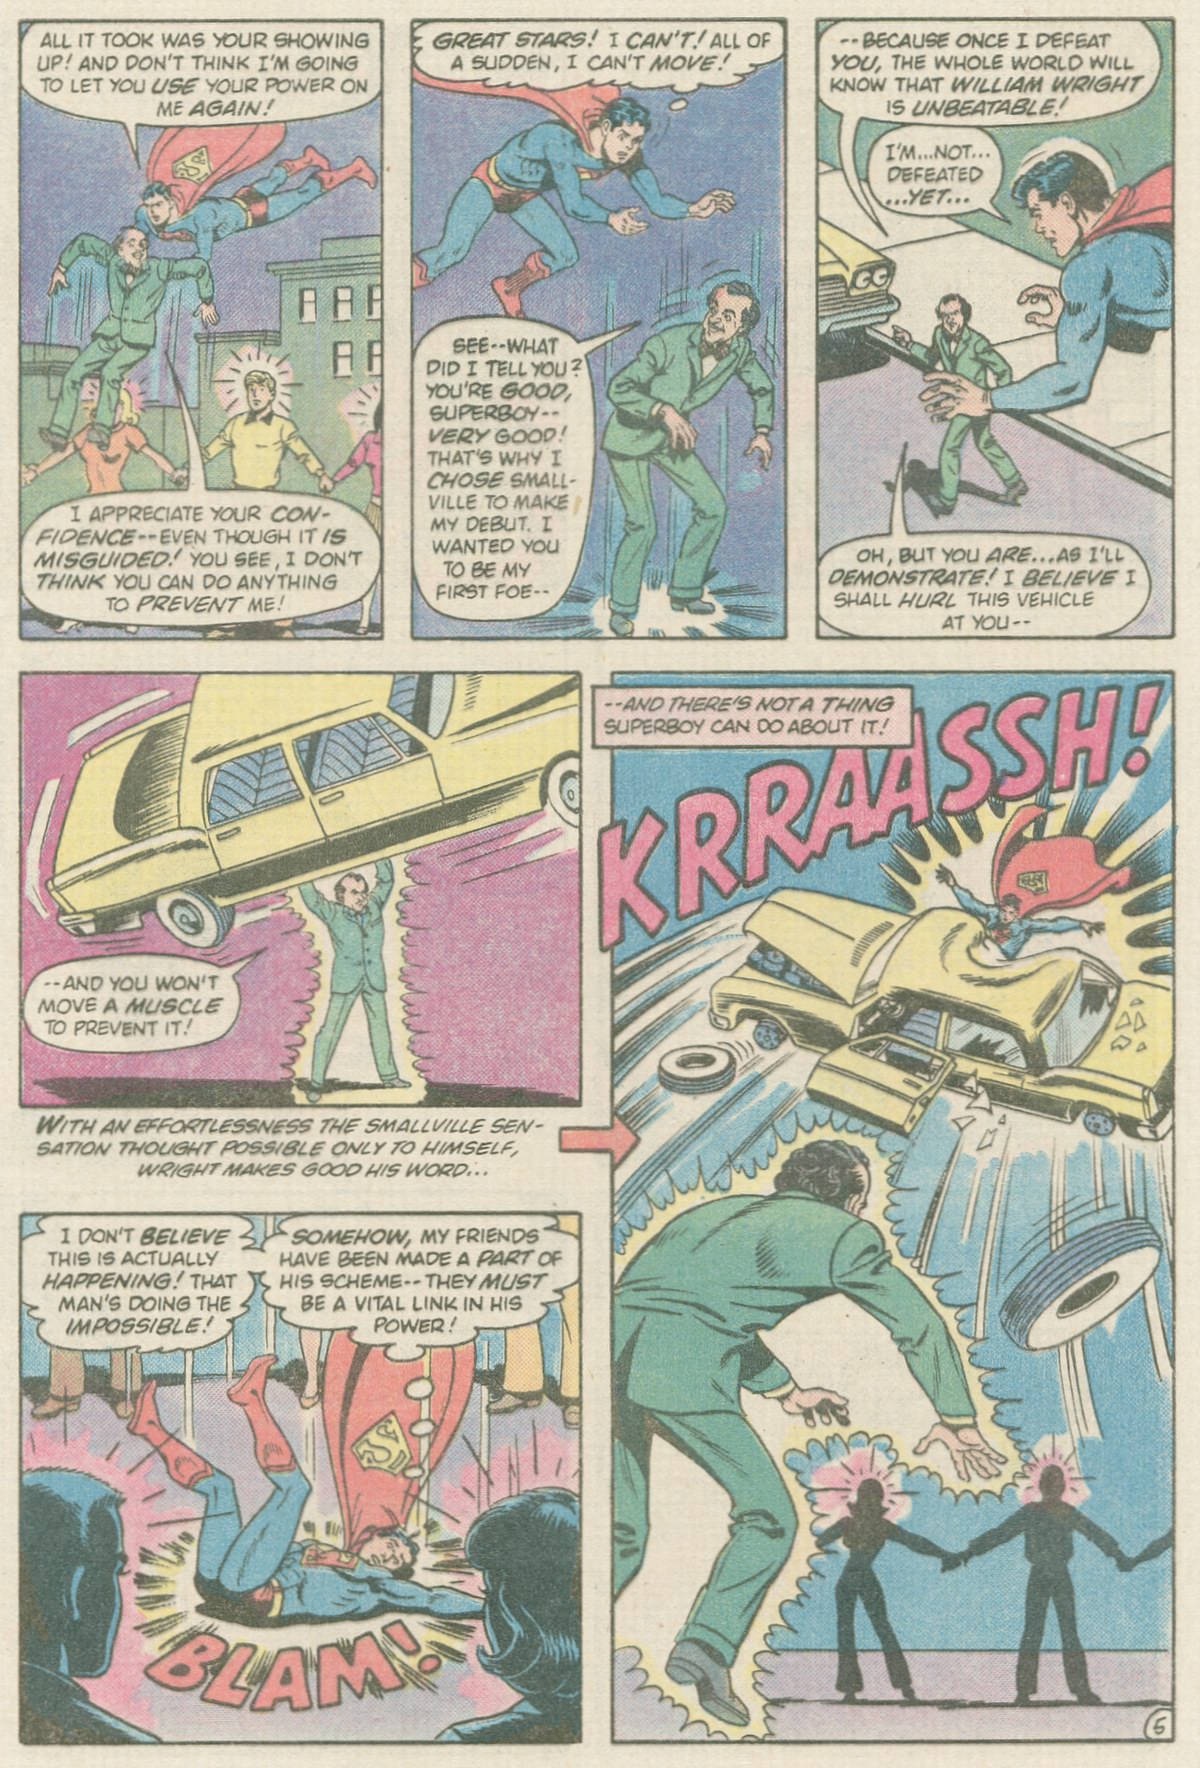 The New Adventures of Superboy 37 Page 5